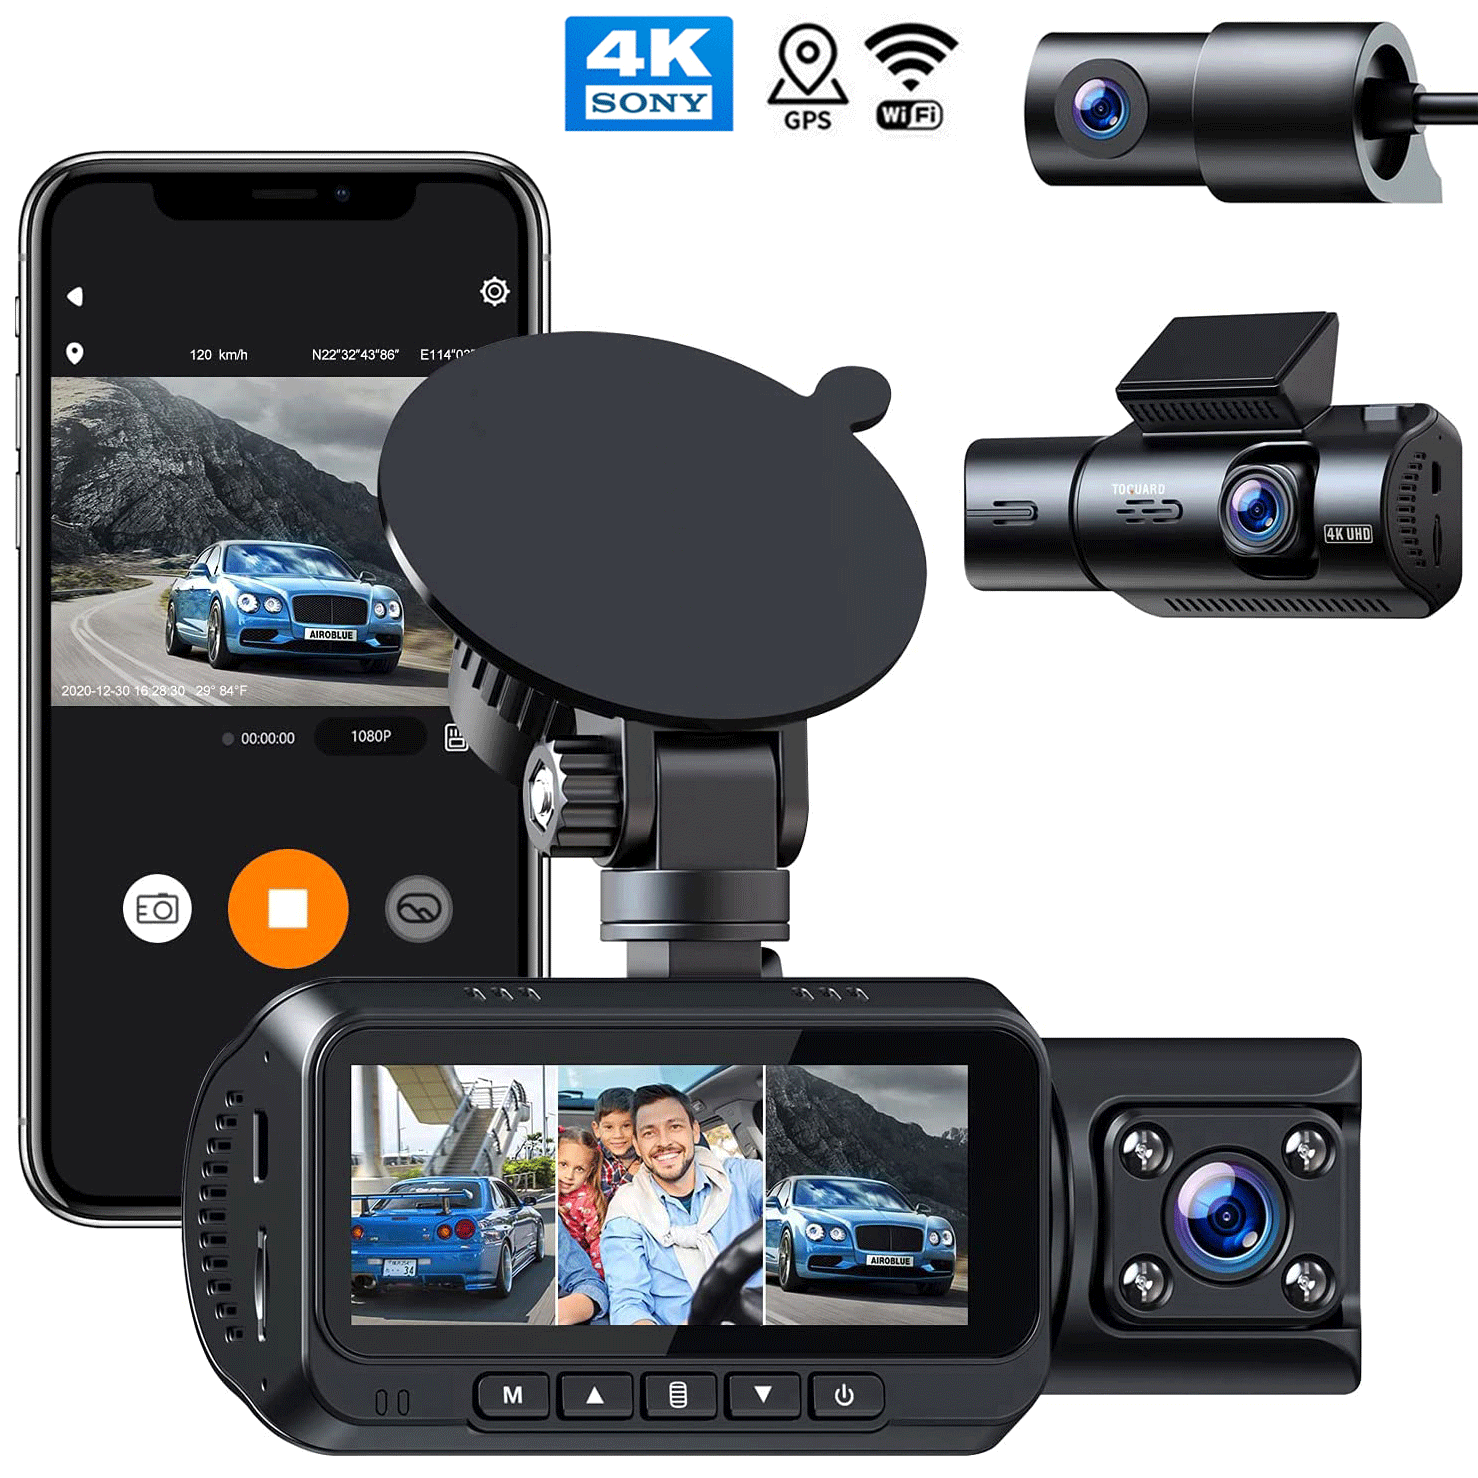 WDR Motion Detection for Lyft Car Taxi TOGUARD Uber Dual Dash Cam Full HD 1080P+1080P Inside and Outside Car Camera Dash Cams 3 LCD 340° Dashboard Camera with G-Sensor Parking Monitor 